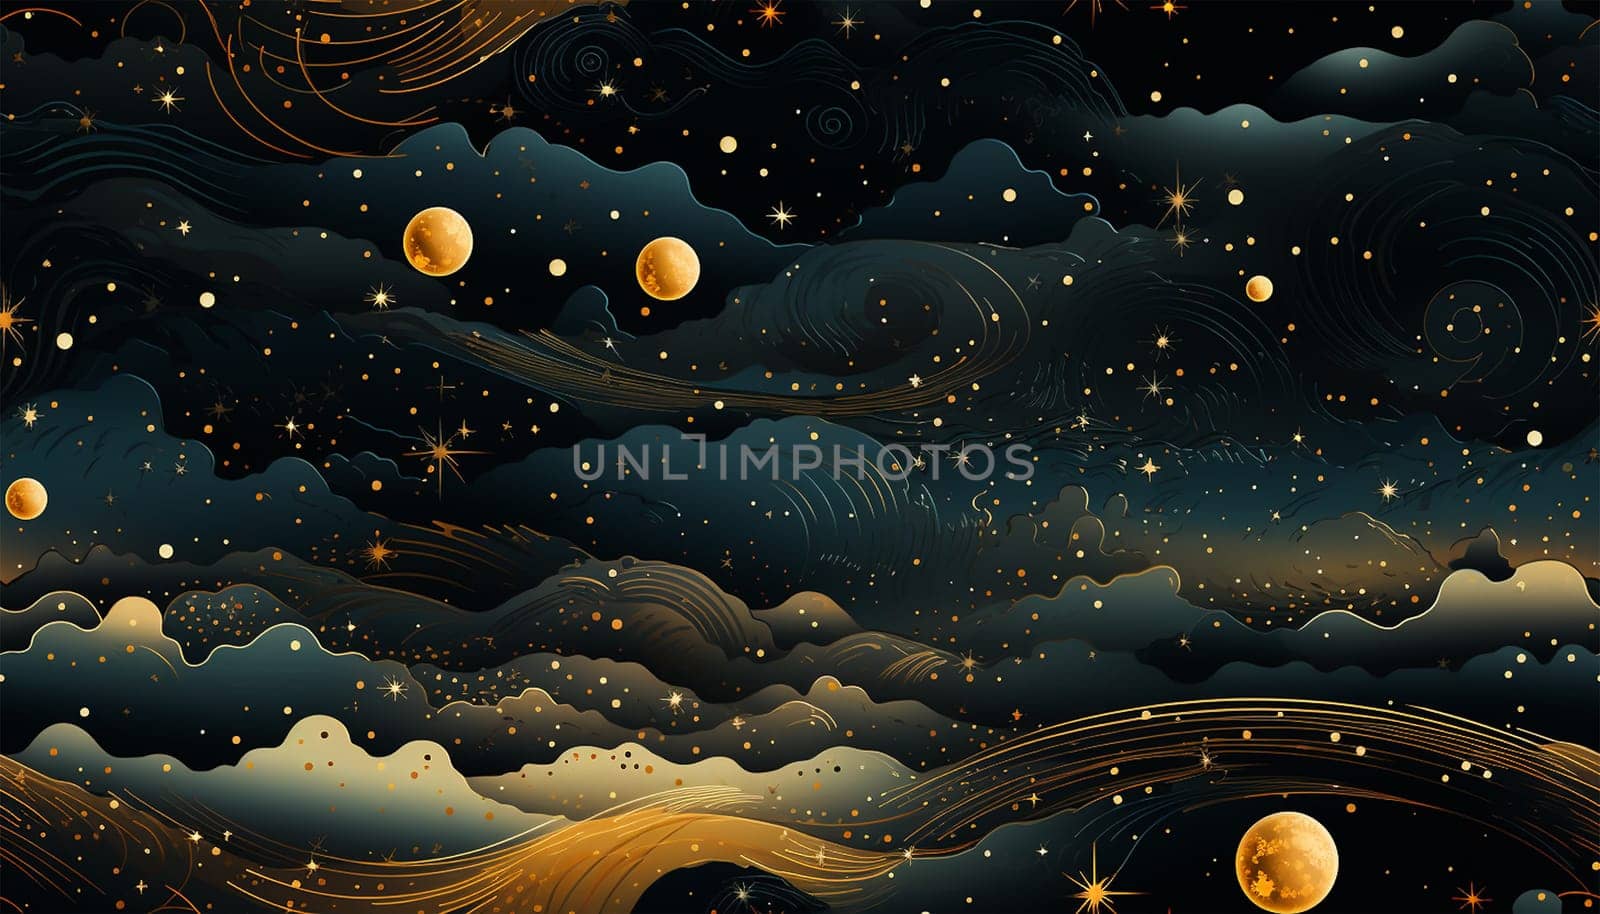 Cosmos galaxy space seamless pattern with planets, comets, constellations and stars. Night sky hand drawn doodle astronomical background for children. Animation design cute